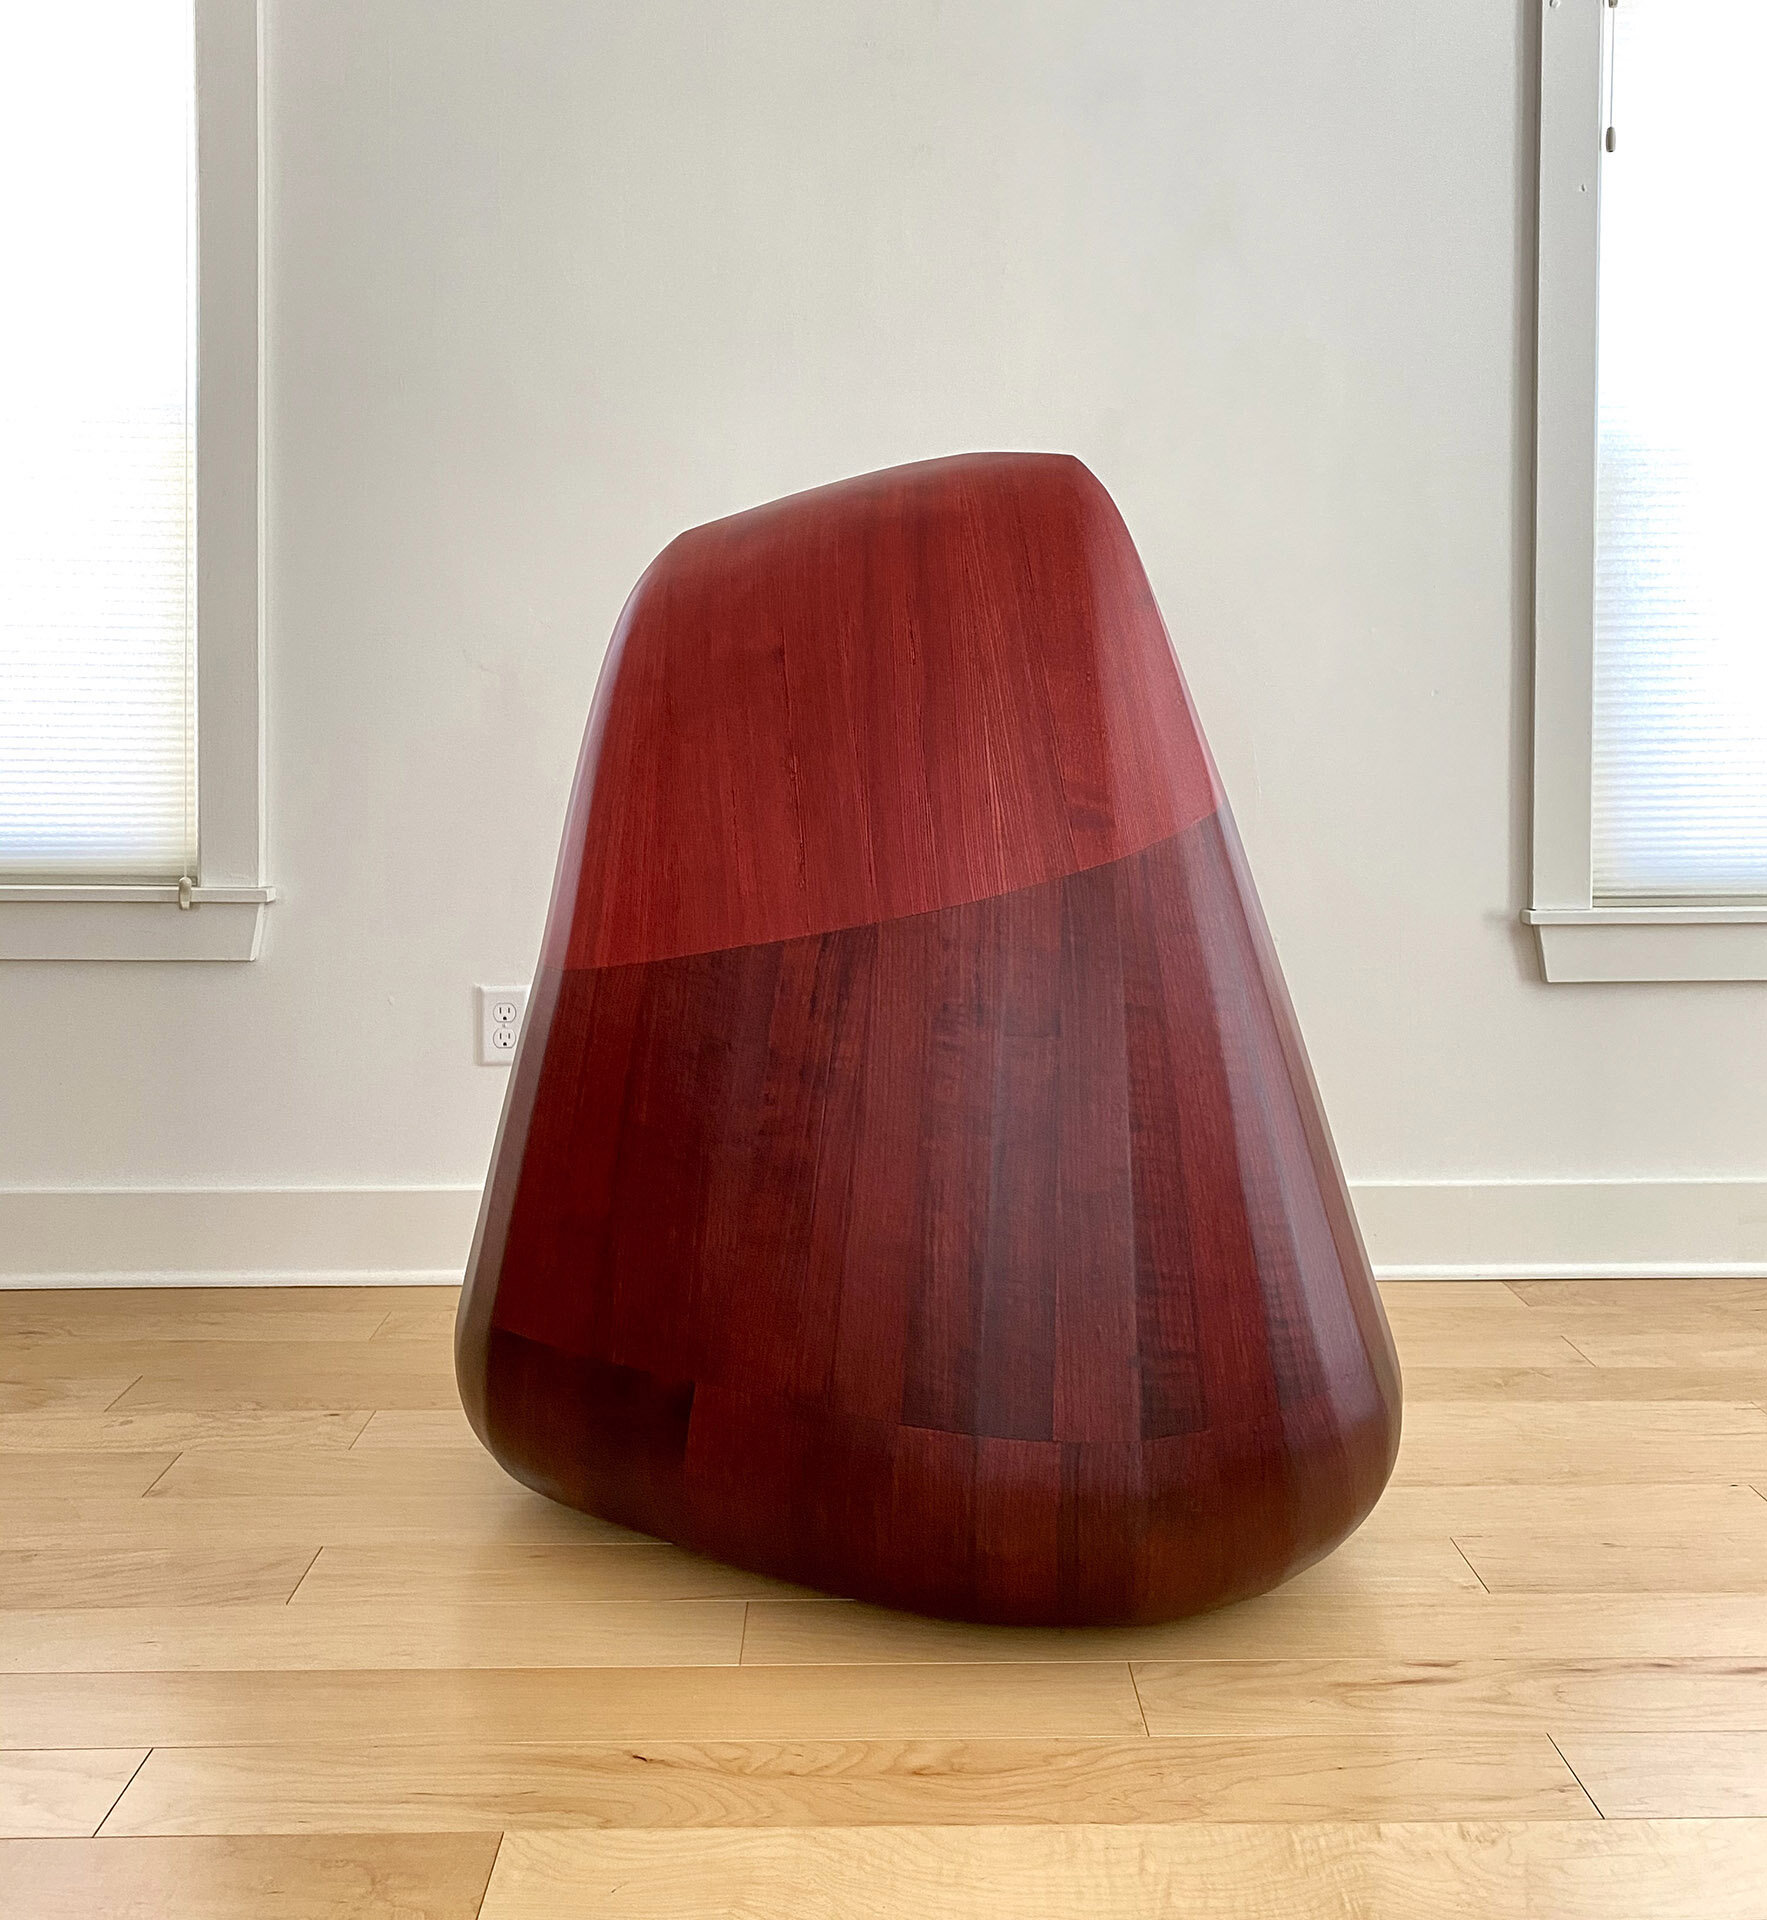  Mostly Modest, 2020  45 x 39 x 28 inches  wood, stain, varnish 